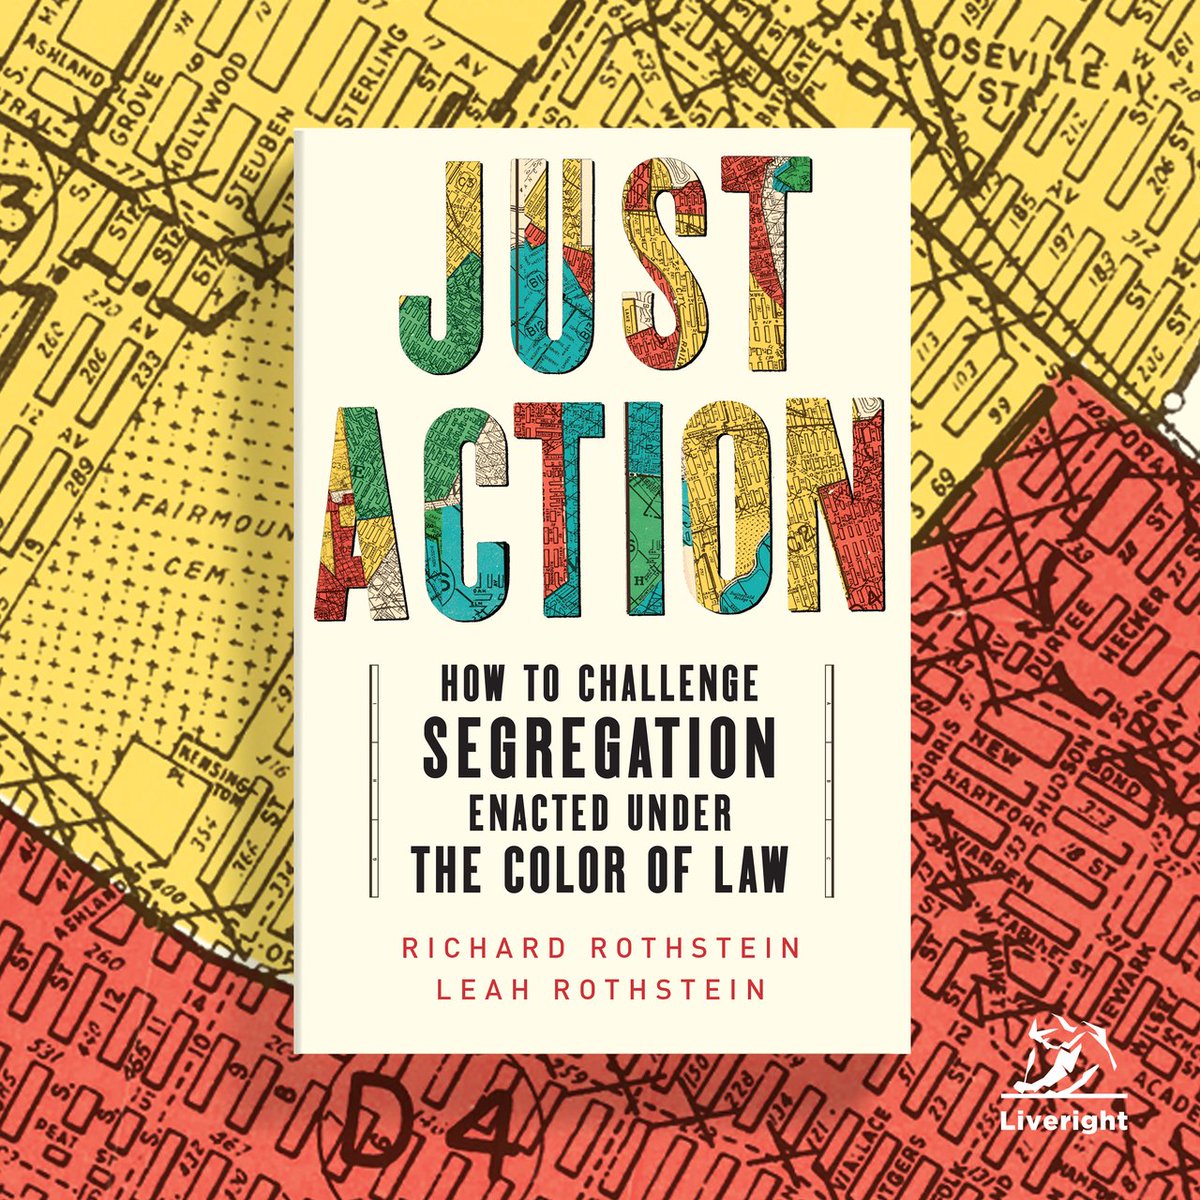 Our Just Action event is just around the corner! Join me and authors Richard Rothstein and Leah Rothstein on 11/15 to learn about their new book “Just Action: How to Challenge Segregation Enacted Under the Color of Law.” RSVP here! tinyurl.com/just-action-rs…